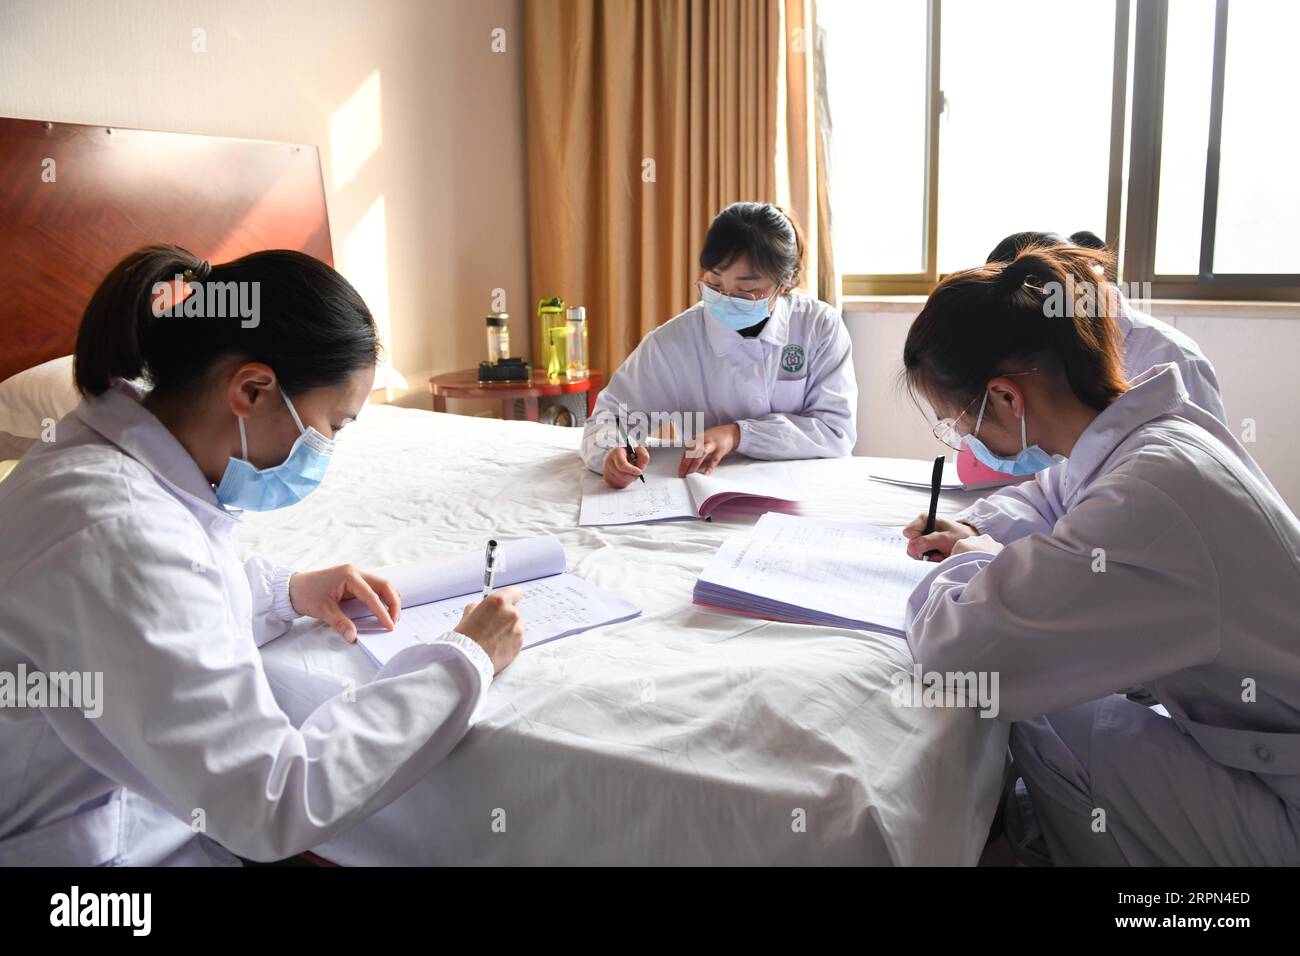 200222 -- HEFEI, Feb. 22, 2020 -- Health workers of Yonghe health station in Changning Community register body temperature of staff members in quarantine in Hefei, east China s Anhui Province,Feb. 21, 2020. Thirty five staff members of the Anhui Branch of China Construction Eighth Engineering Division Corp. Ltd., who attended the construction of the makeshift Leishenshan hospital for novel coronavirus pneumonia patients in Wuhan, have recently come back to Hefei. They are now in quarantine for medical observation in a hotel in Hefei. Each of them has a separate room which is disinfected every Stock Photo